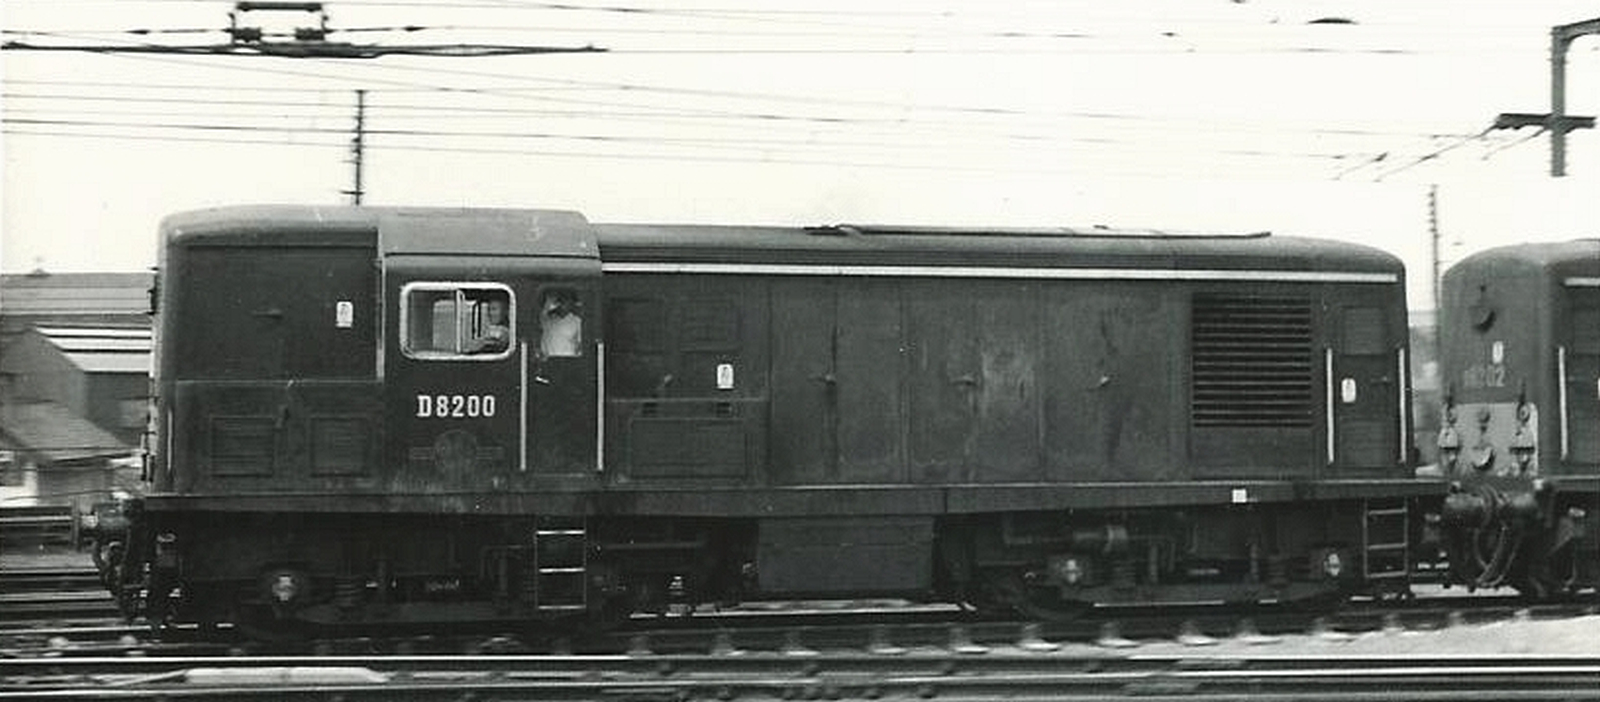 D8200 in July 1966 together with D8202 in front of a freight train at Stratford Depot